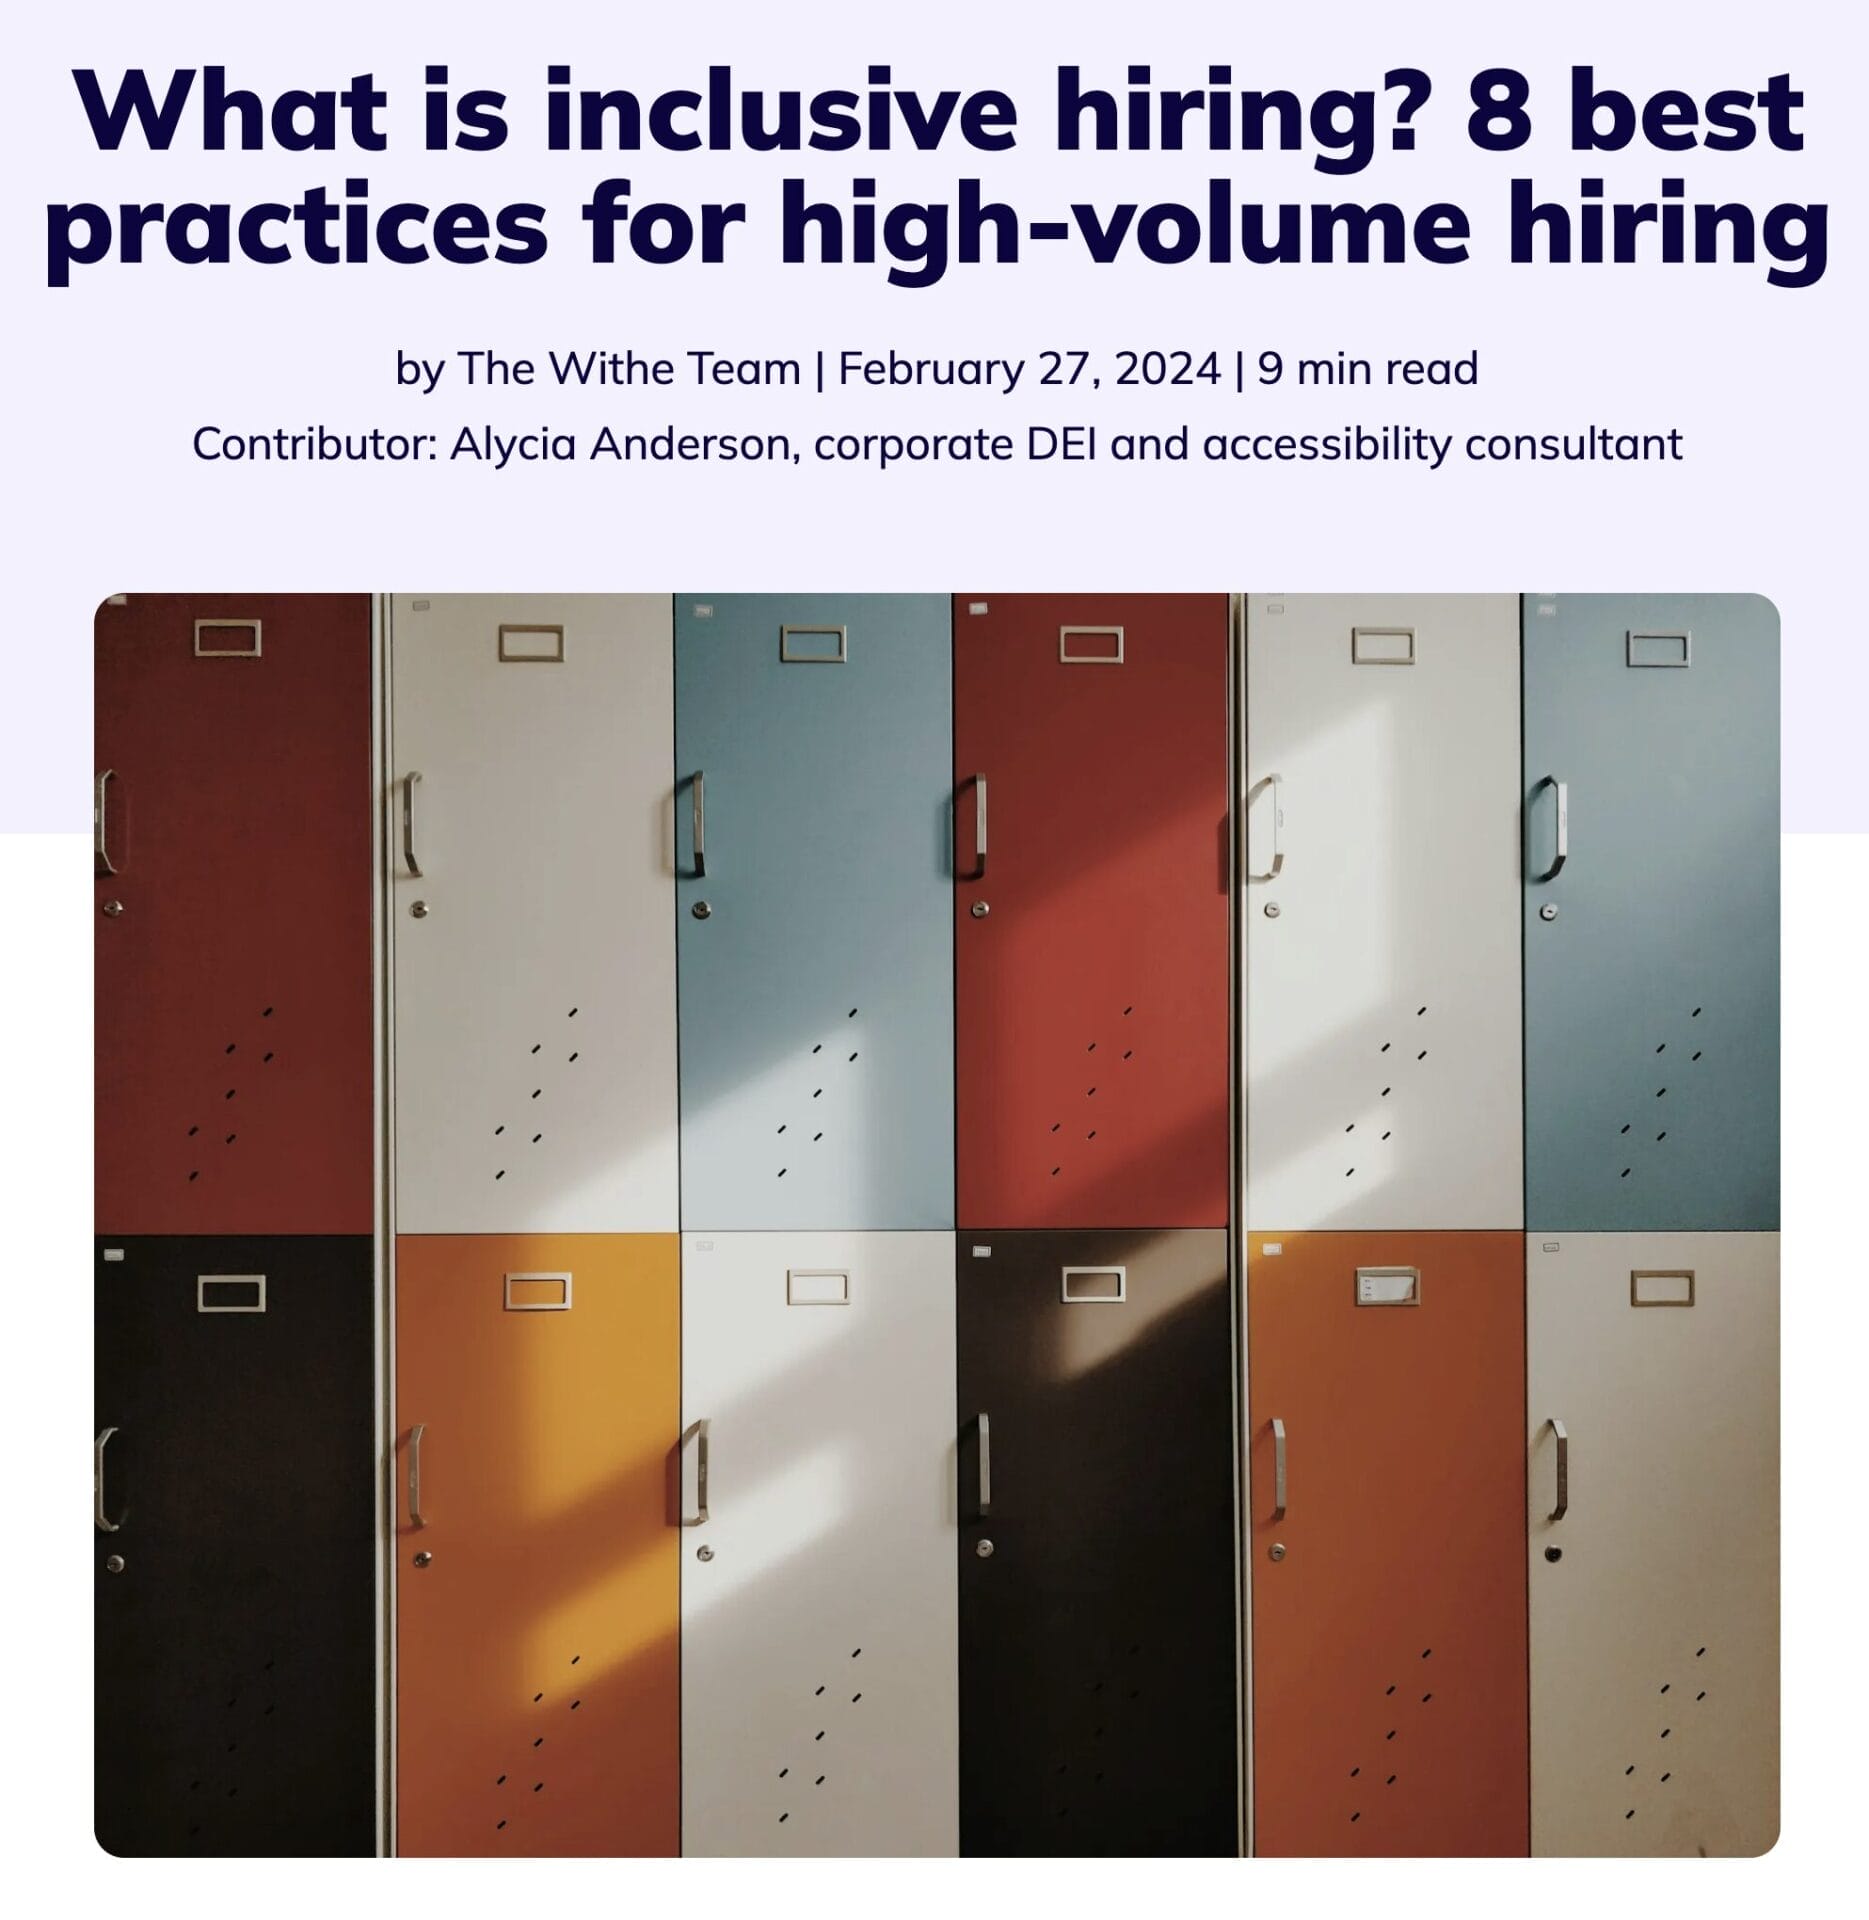 Image Description: Lockers of various colors with a title What is inclusive hiring? 8 best practices for high-volume hiring.